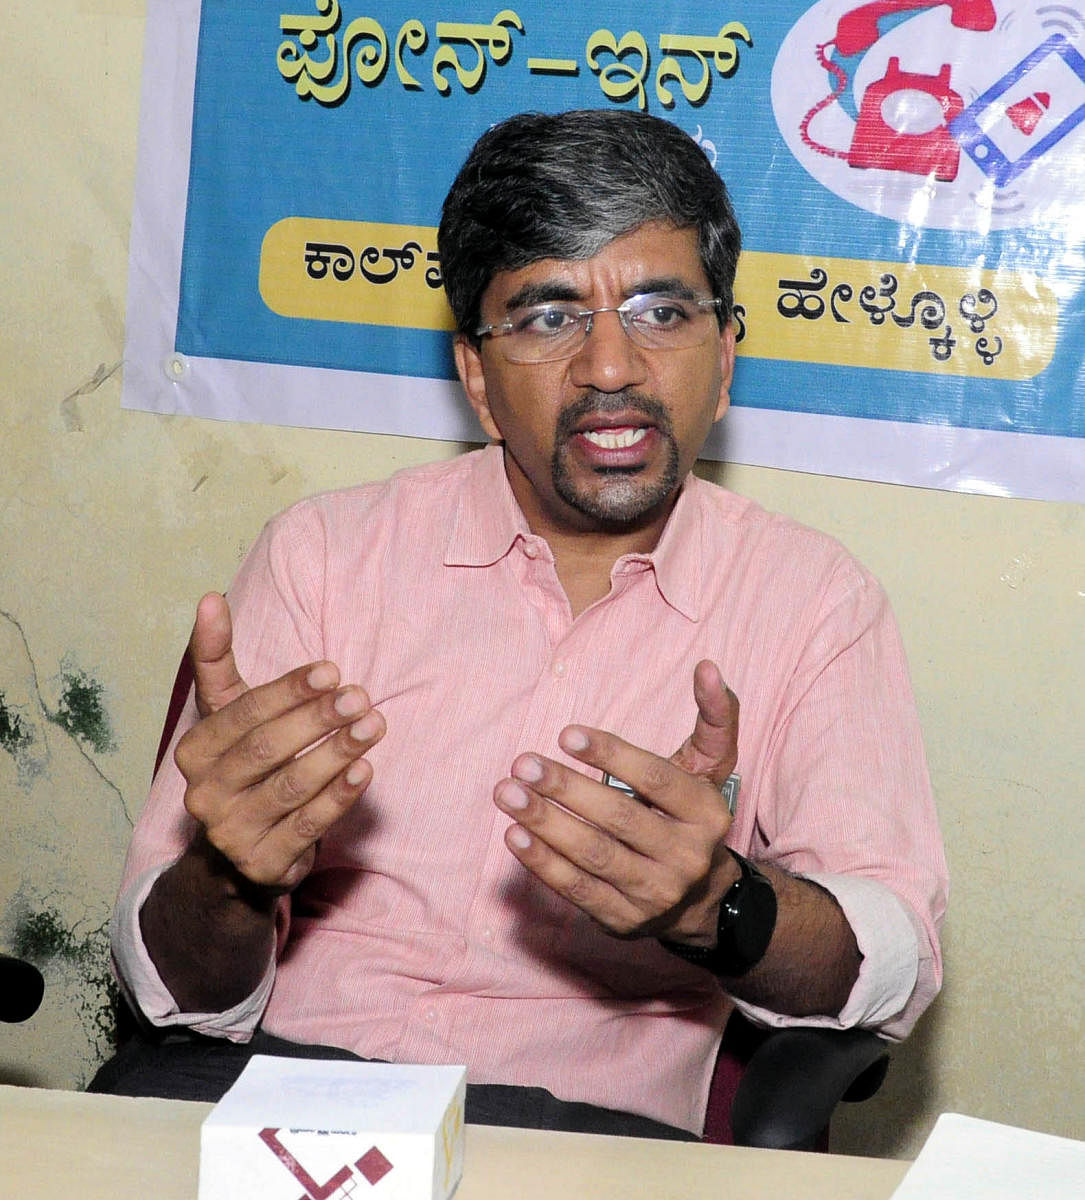 Dr Shashikiran Umakanth, Head of Department of Medicine, at Dr T M A Pai Hospital in Udupi speaks during Prajavani Phone-in programme held at PV-DH Editorial office in Udupi on Monday.